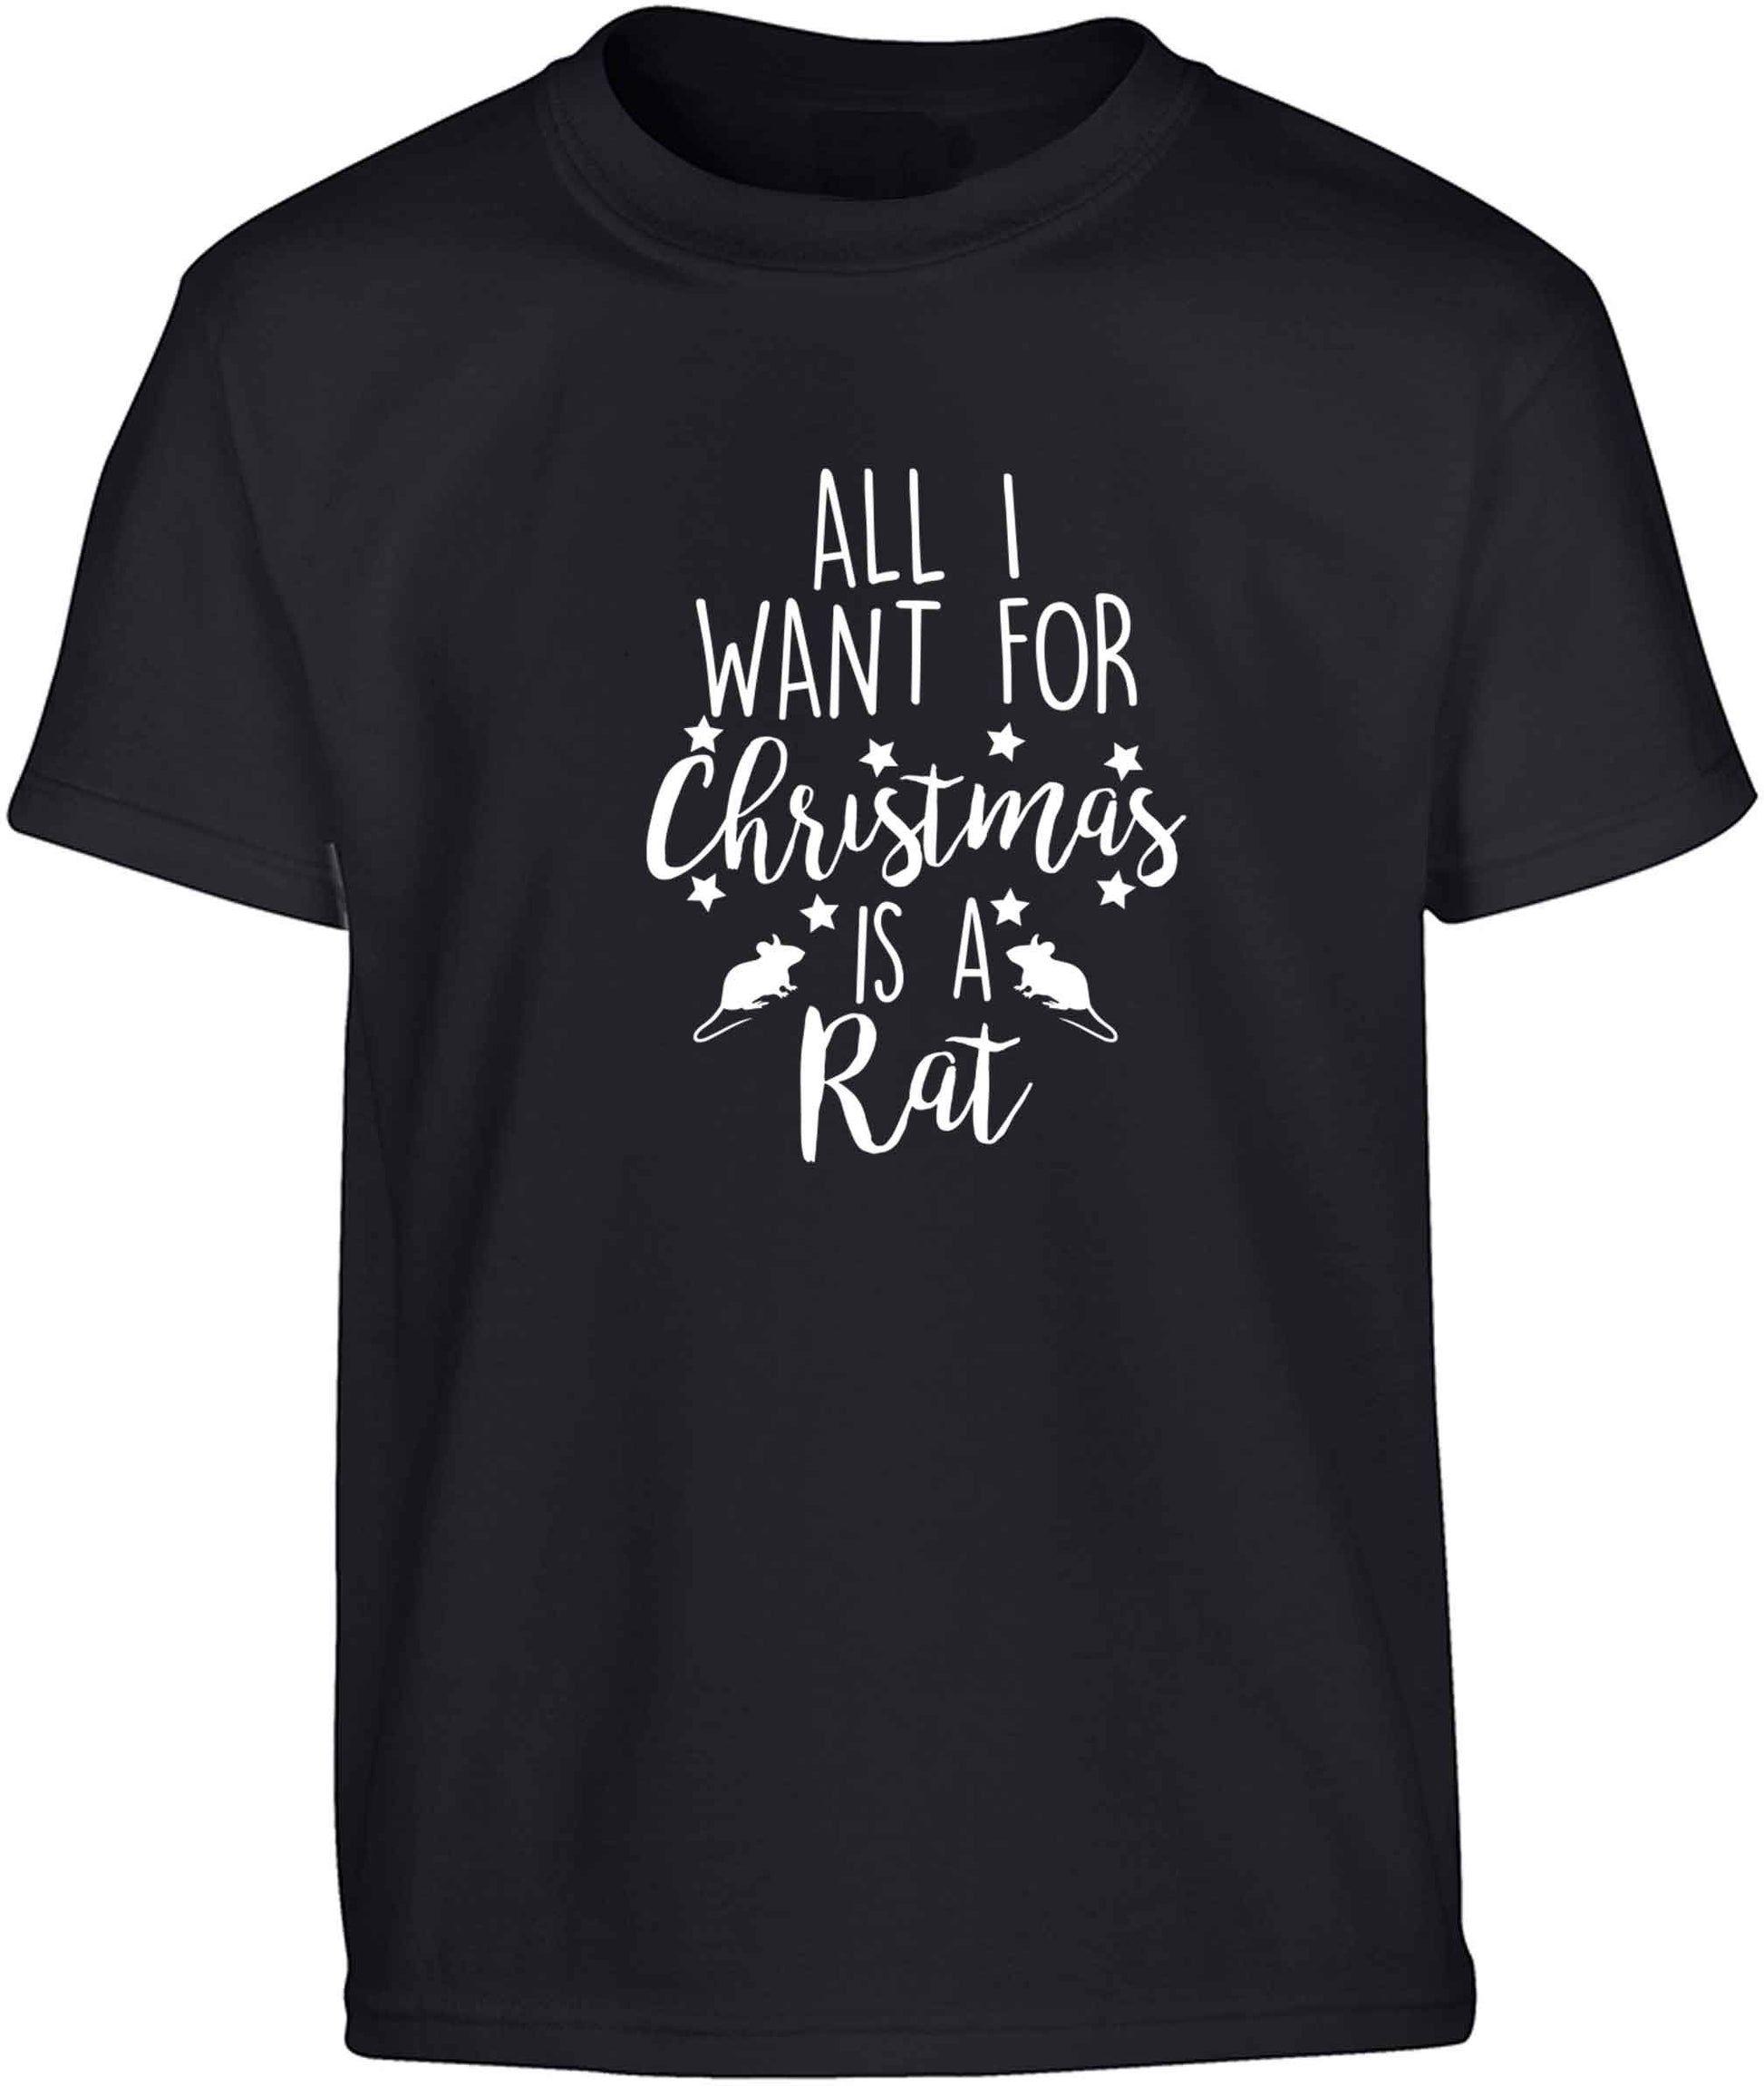 All I want for Christmas is a rat Children's black Tshirt 12-13 Years